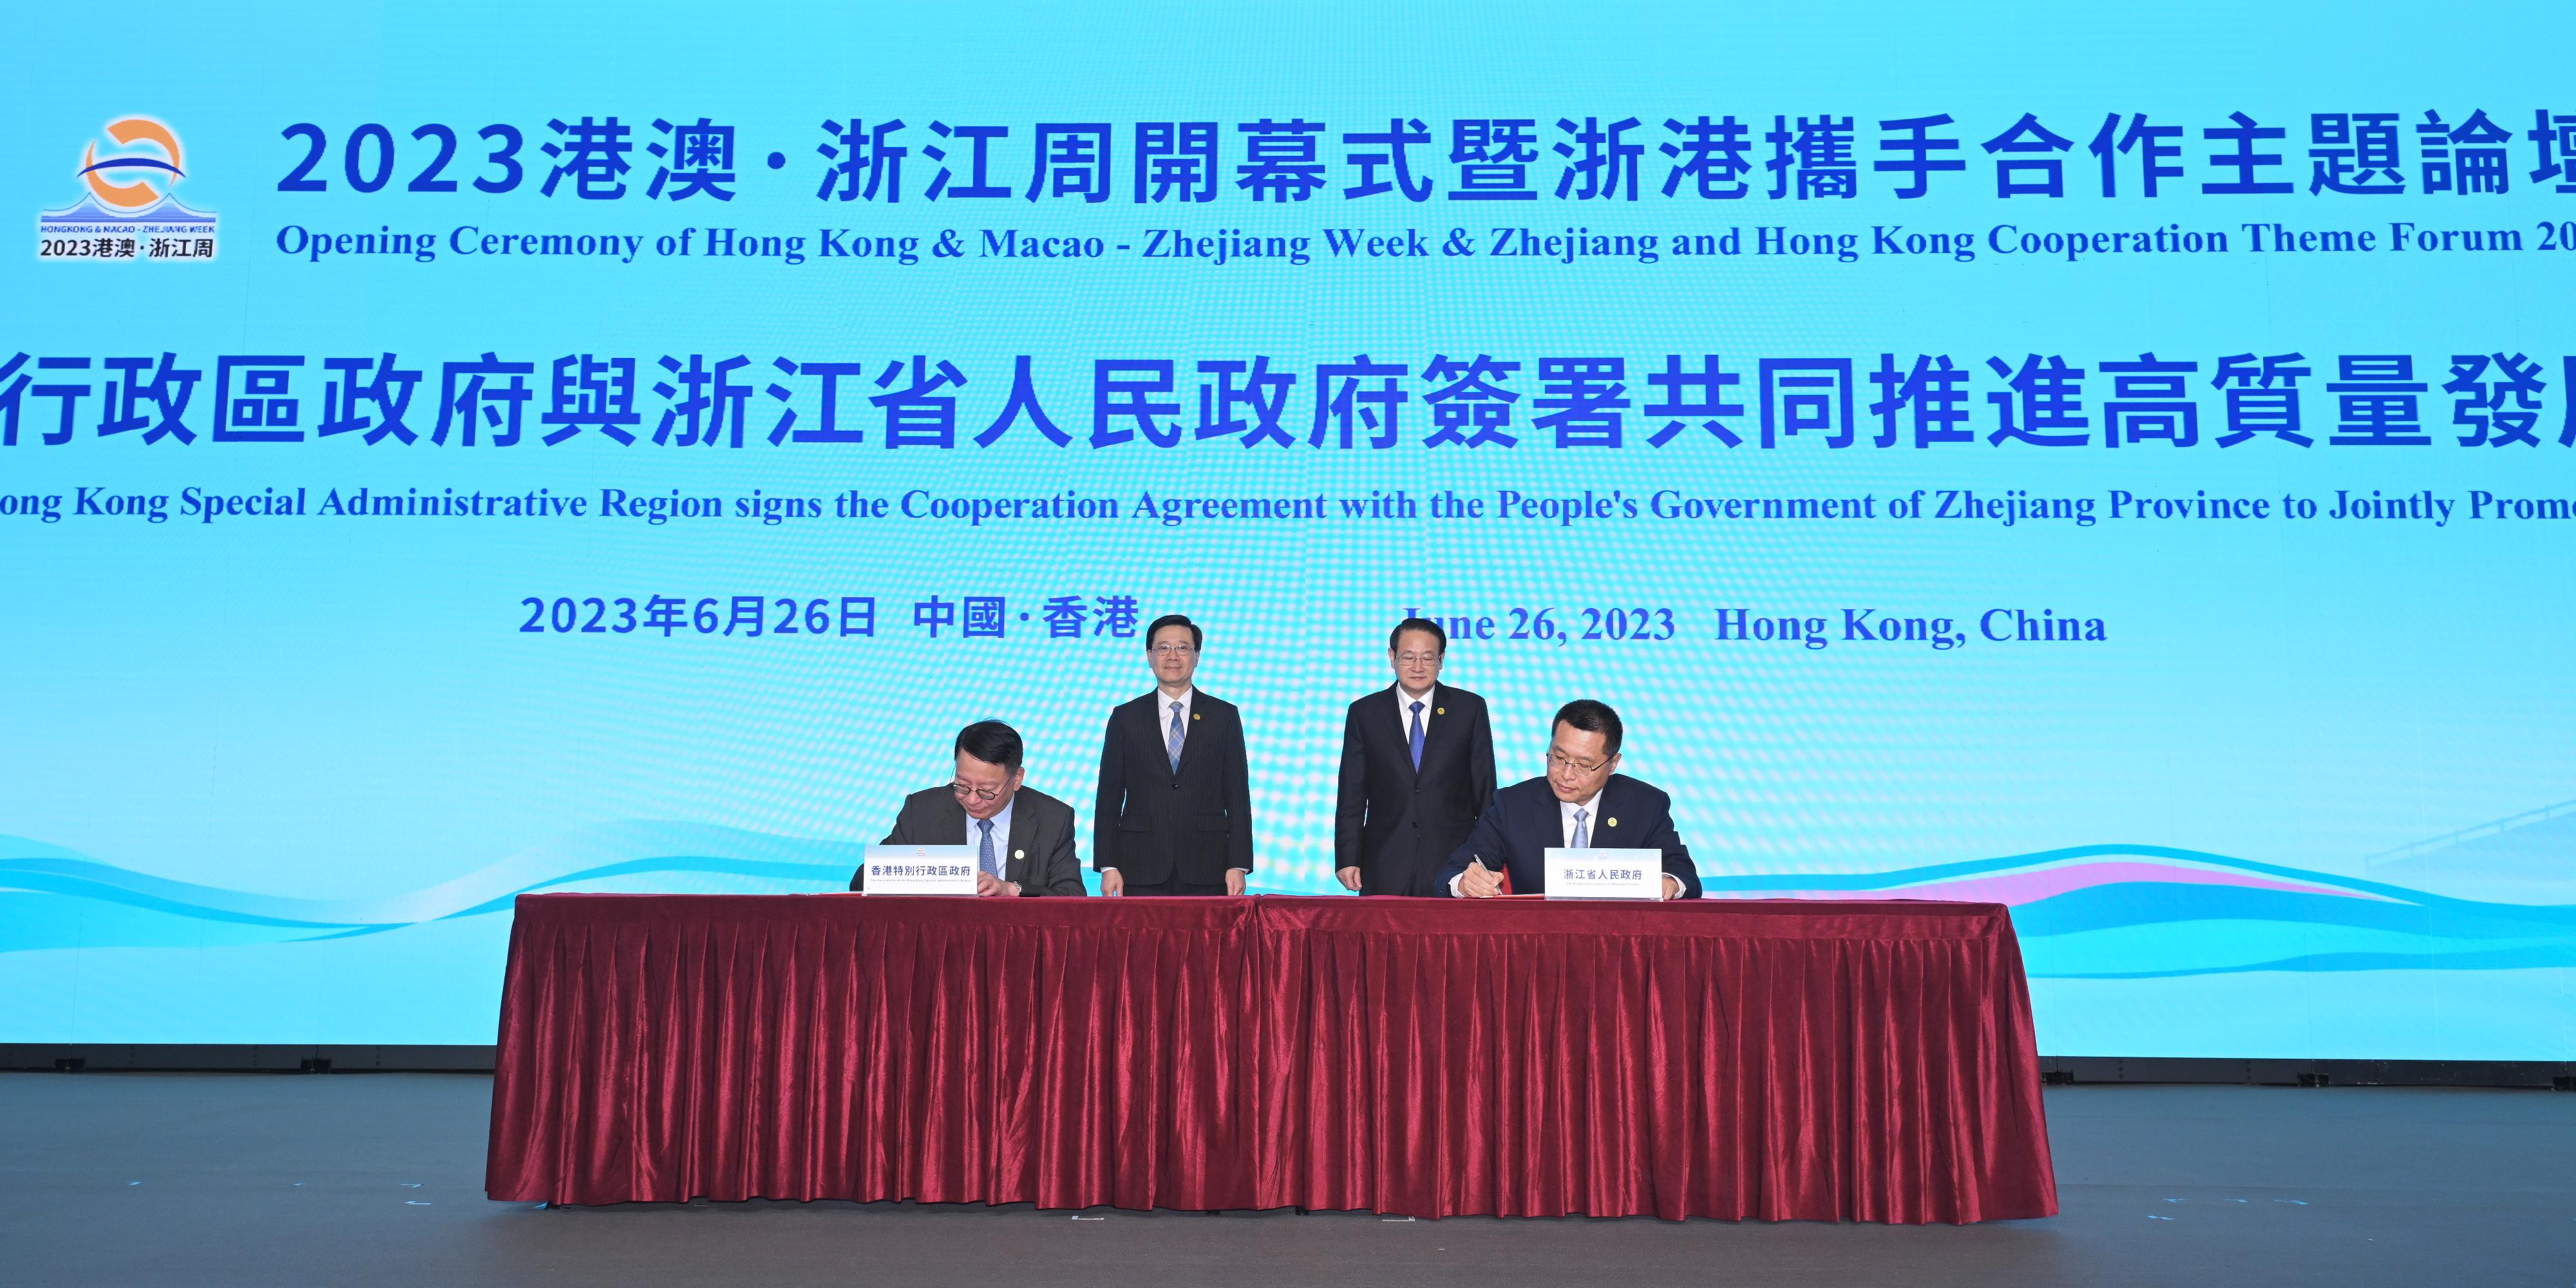 The Chief Executive, Mr John Lee, attended the Opening Ceremony of Hong Kong & Macao - Zhejiang Week & Zhejiang and Hong Kong Cooperation Theme Forum 2023 today (June 26). Photo shows the Chief Secretary for Administration, Mr Chan Kwok-ki (front row, left), and Vice Governor of the People's Government of Zhejiang Province Mr Lu Shan (front row, right), as witnessed by Mr Lee (back row, left), and the Secretary of the CPC Zhejiang Provincial Committee, Mr Yi Lianhong (back row, right), sign an agreement on co-operation between Hong Kong and Zhejiang.